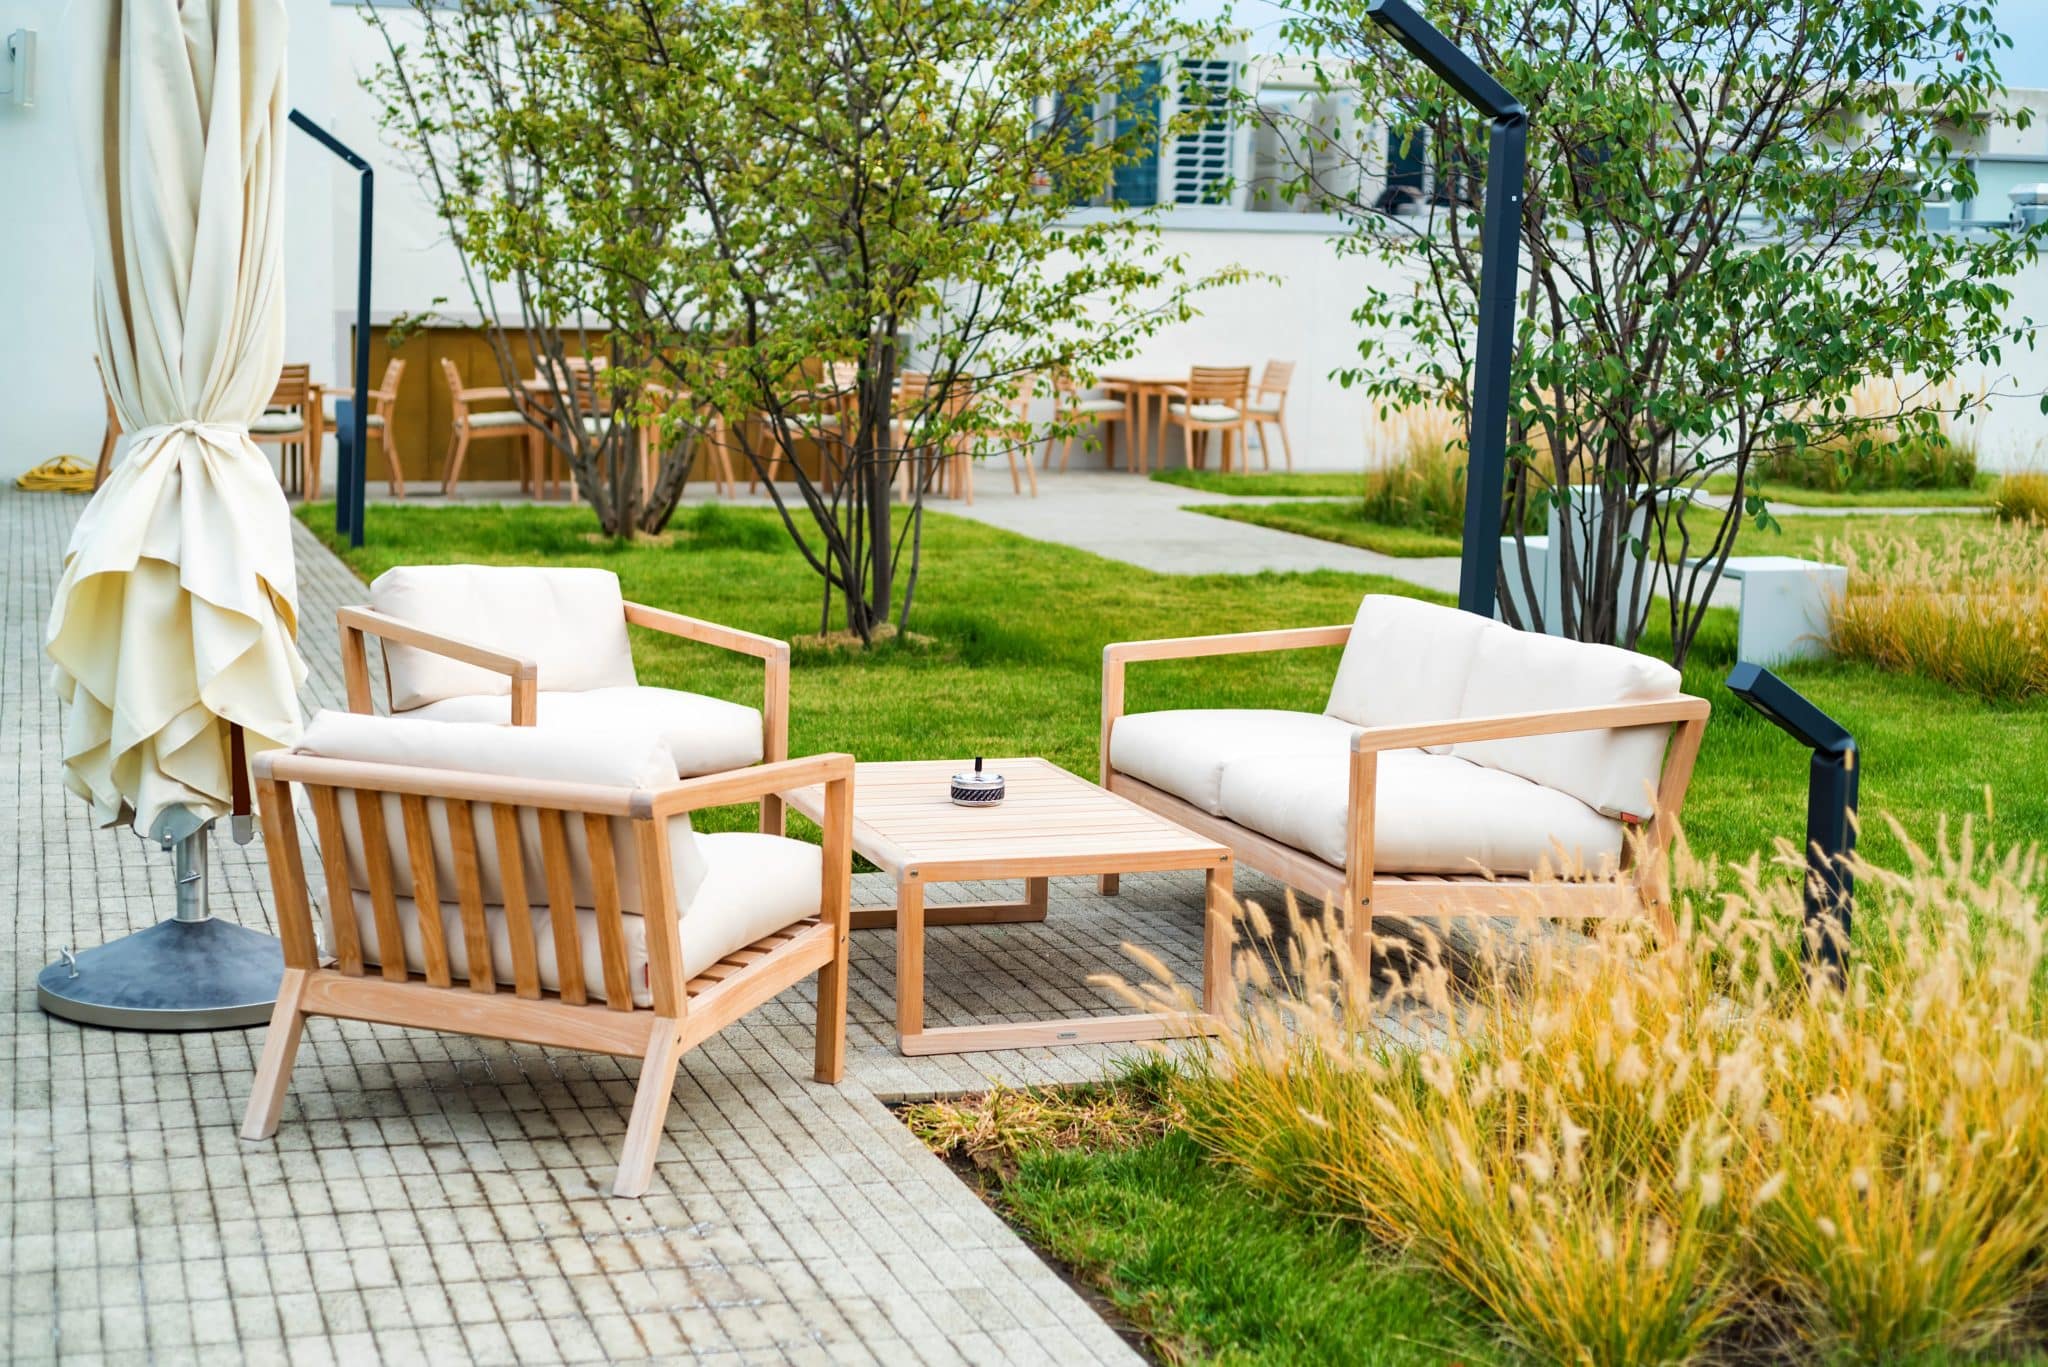 Simple Ways To Add Privacy To Your Outdoor Living Area